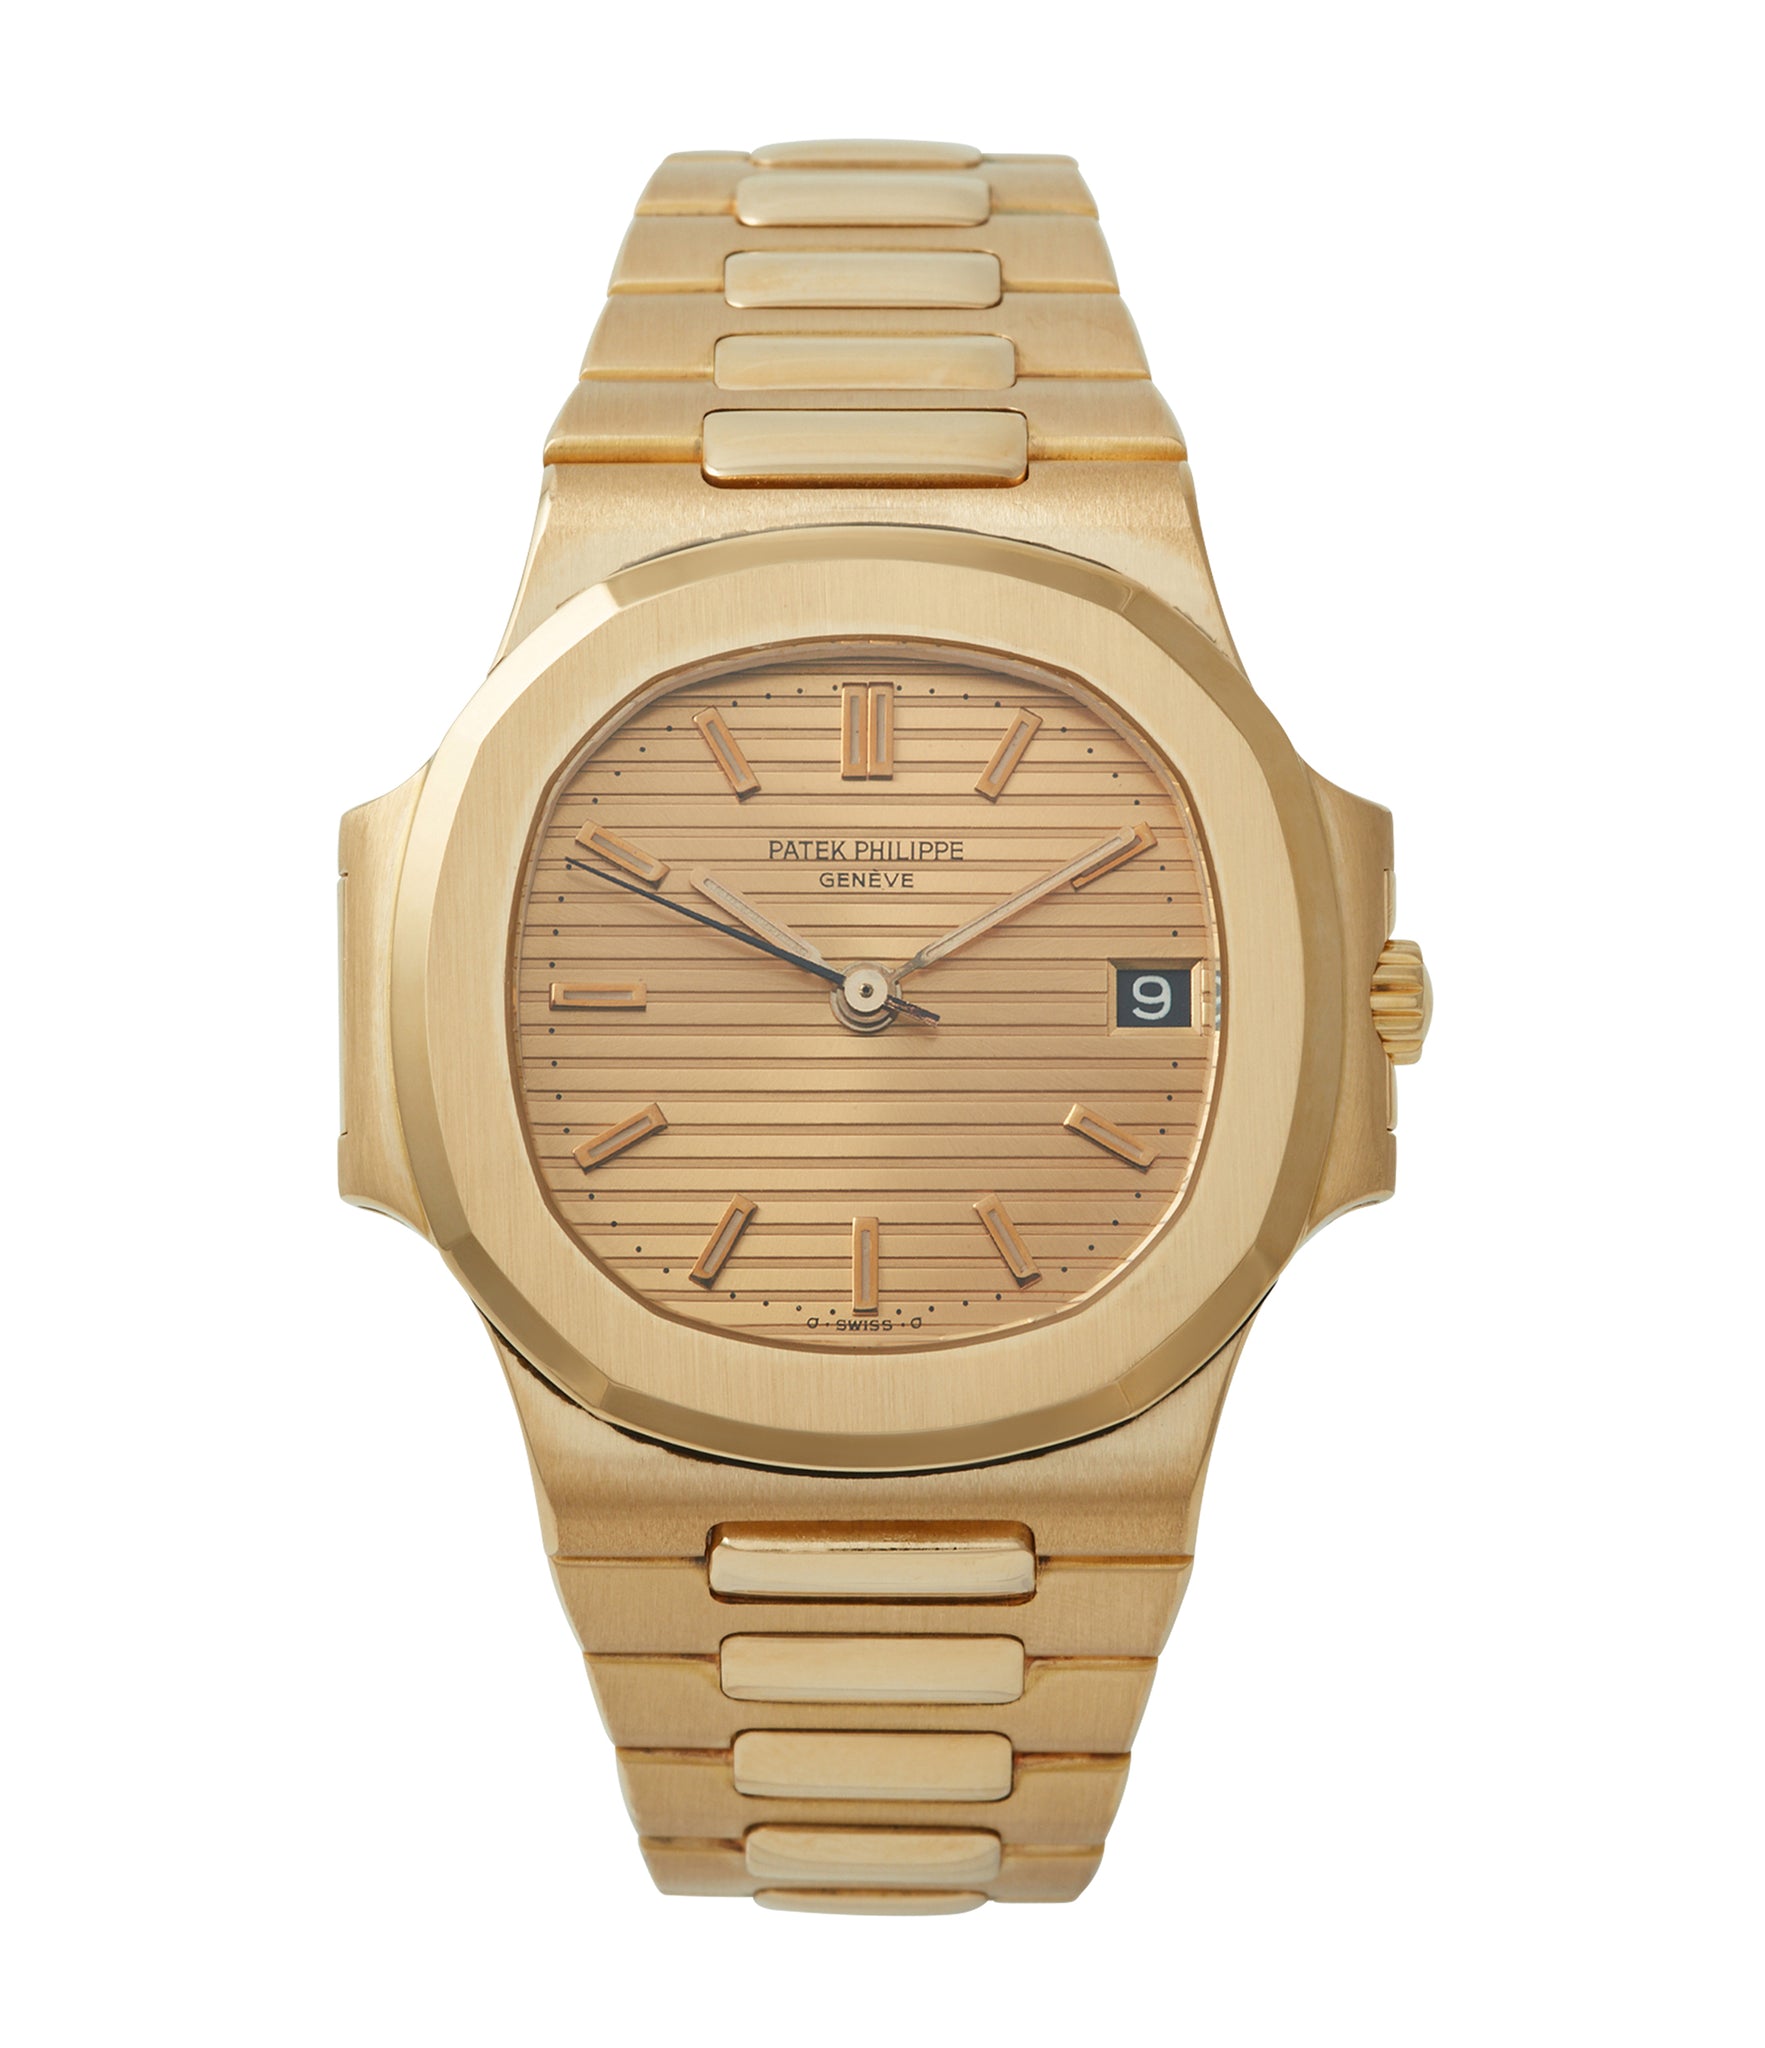 3800 Patek Philippe Nautilus yellow gold dark date disc luxury sports watch for sale online A Collected Man London UK specialist rare watches